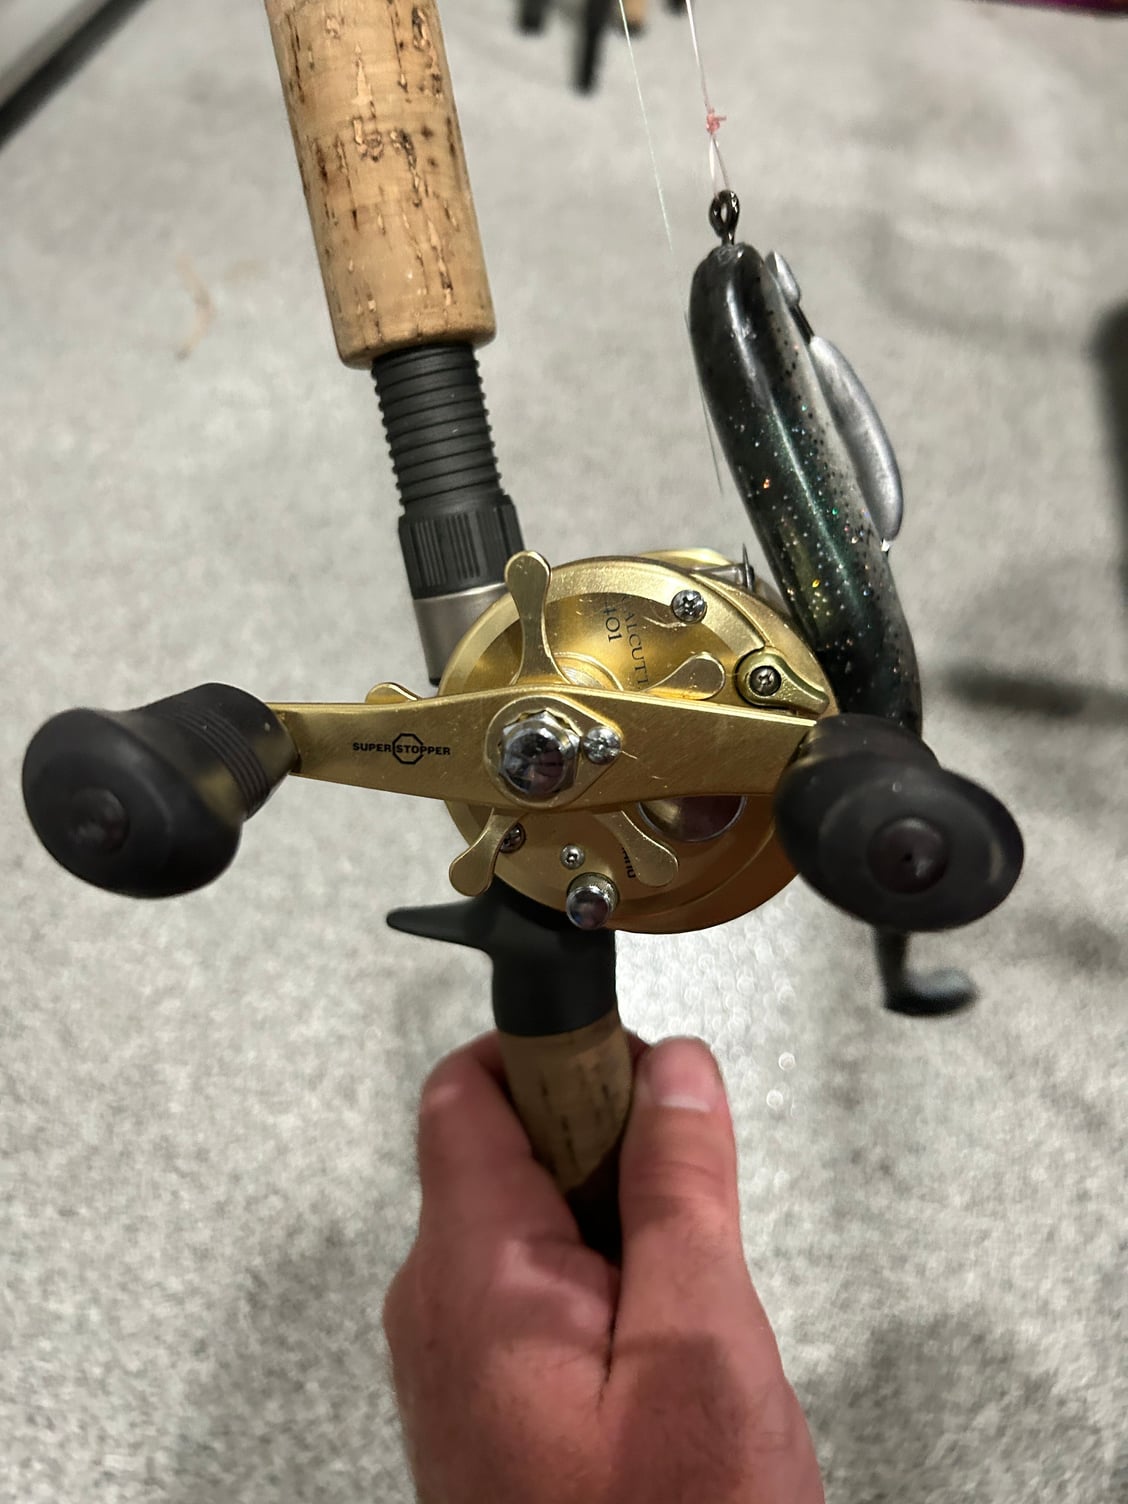 Shimano Calcutta 700S reels for sale - The Hull Truth - Boating